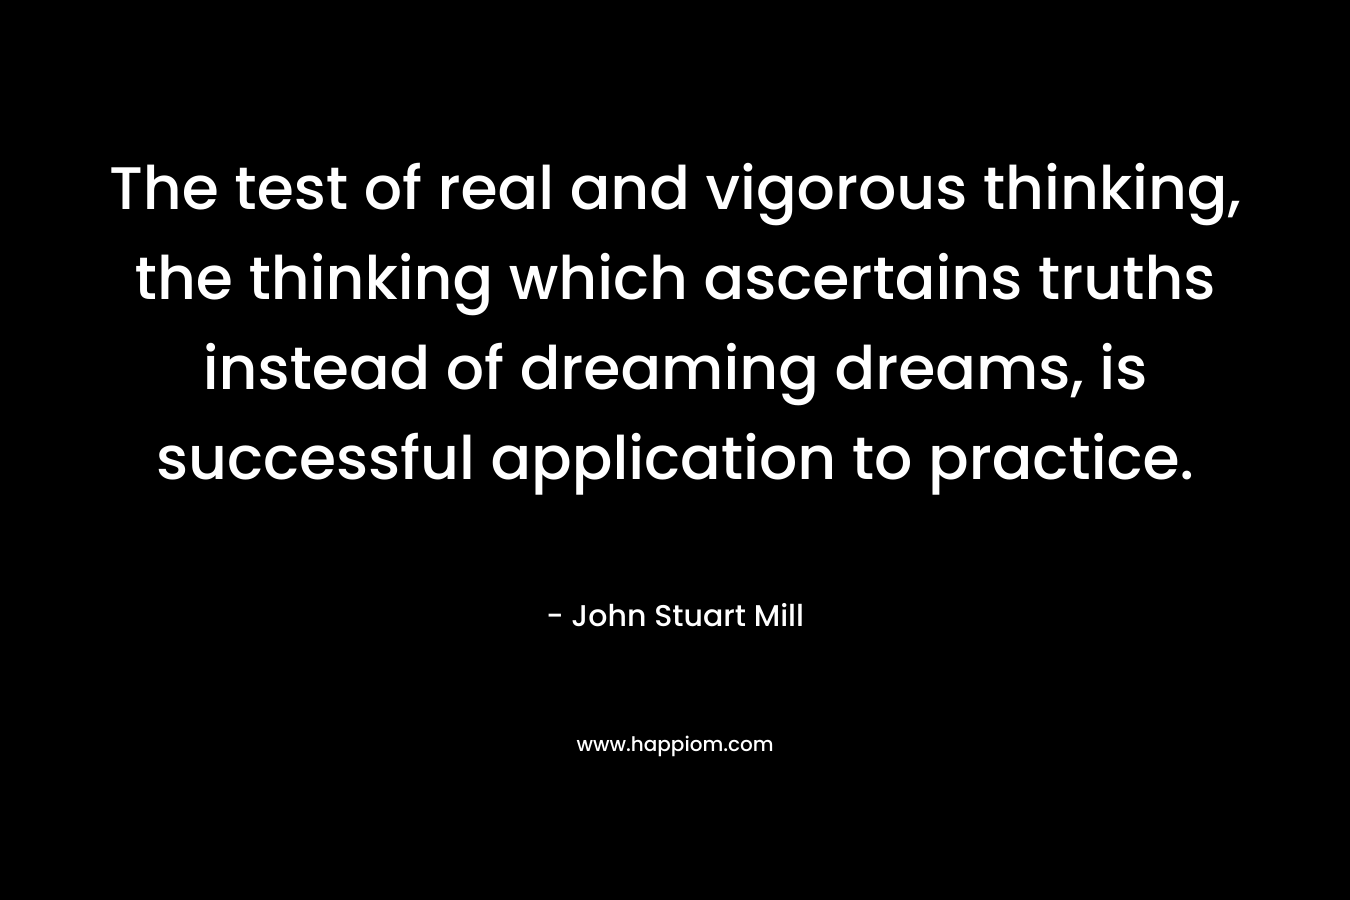 The test of real and vigorous thinking, the thinking which ascertains truths instead of dreaming dreams, is successful application to practice.